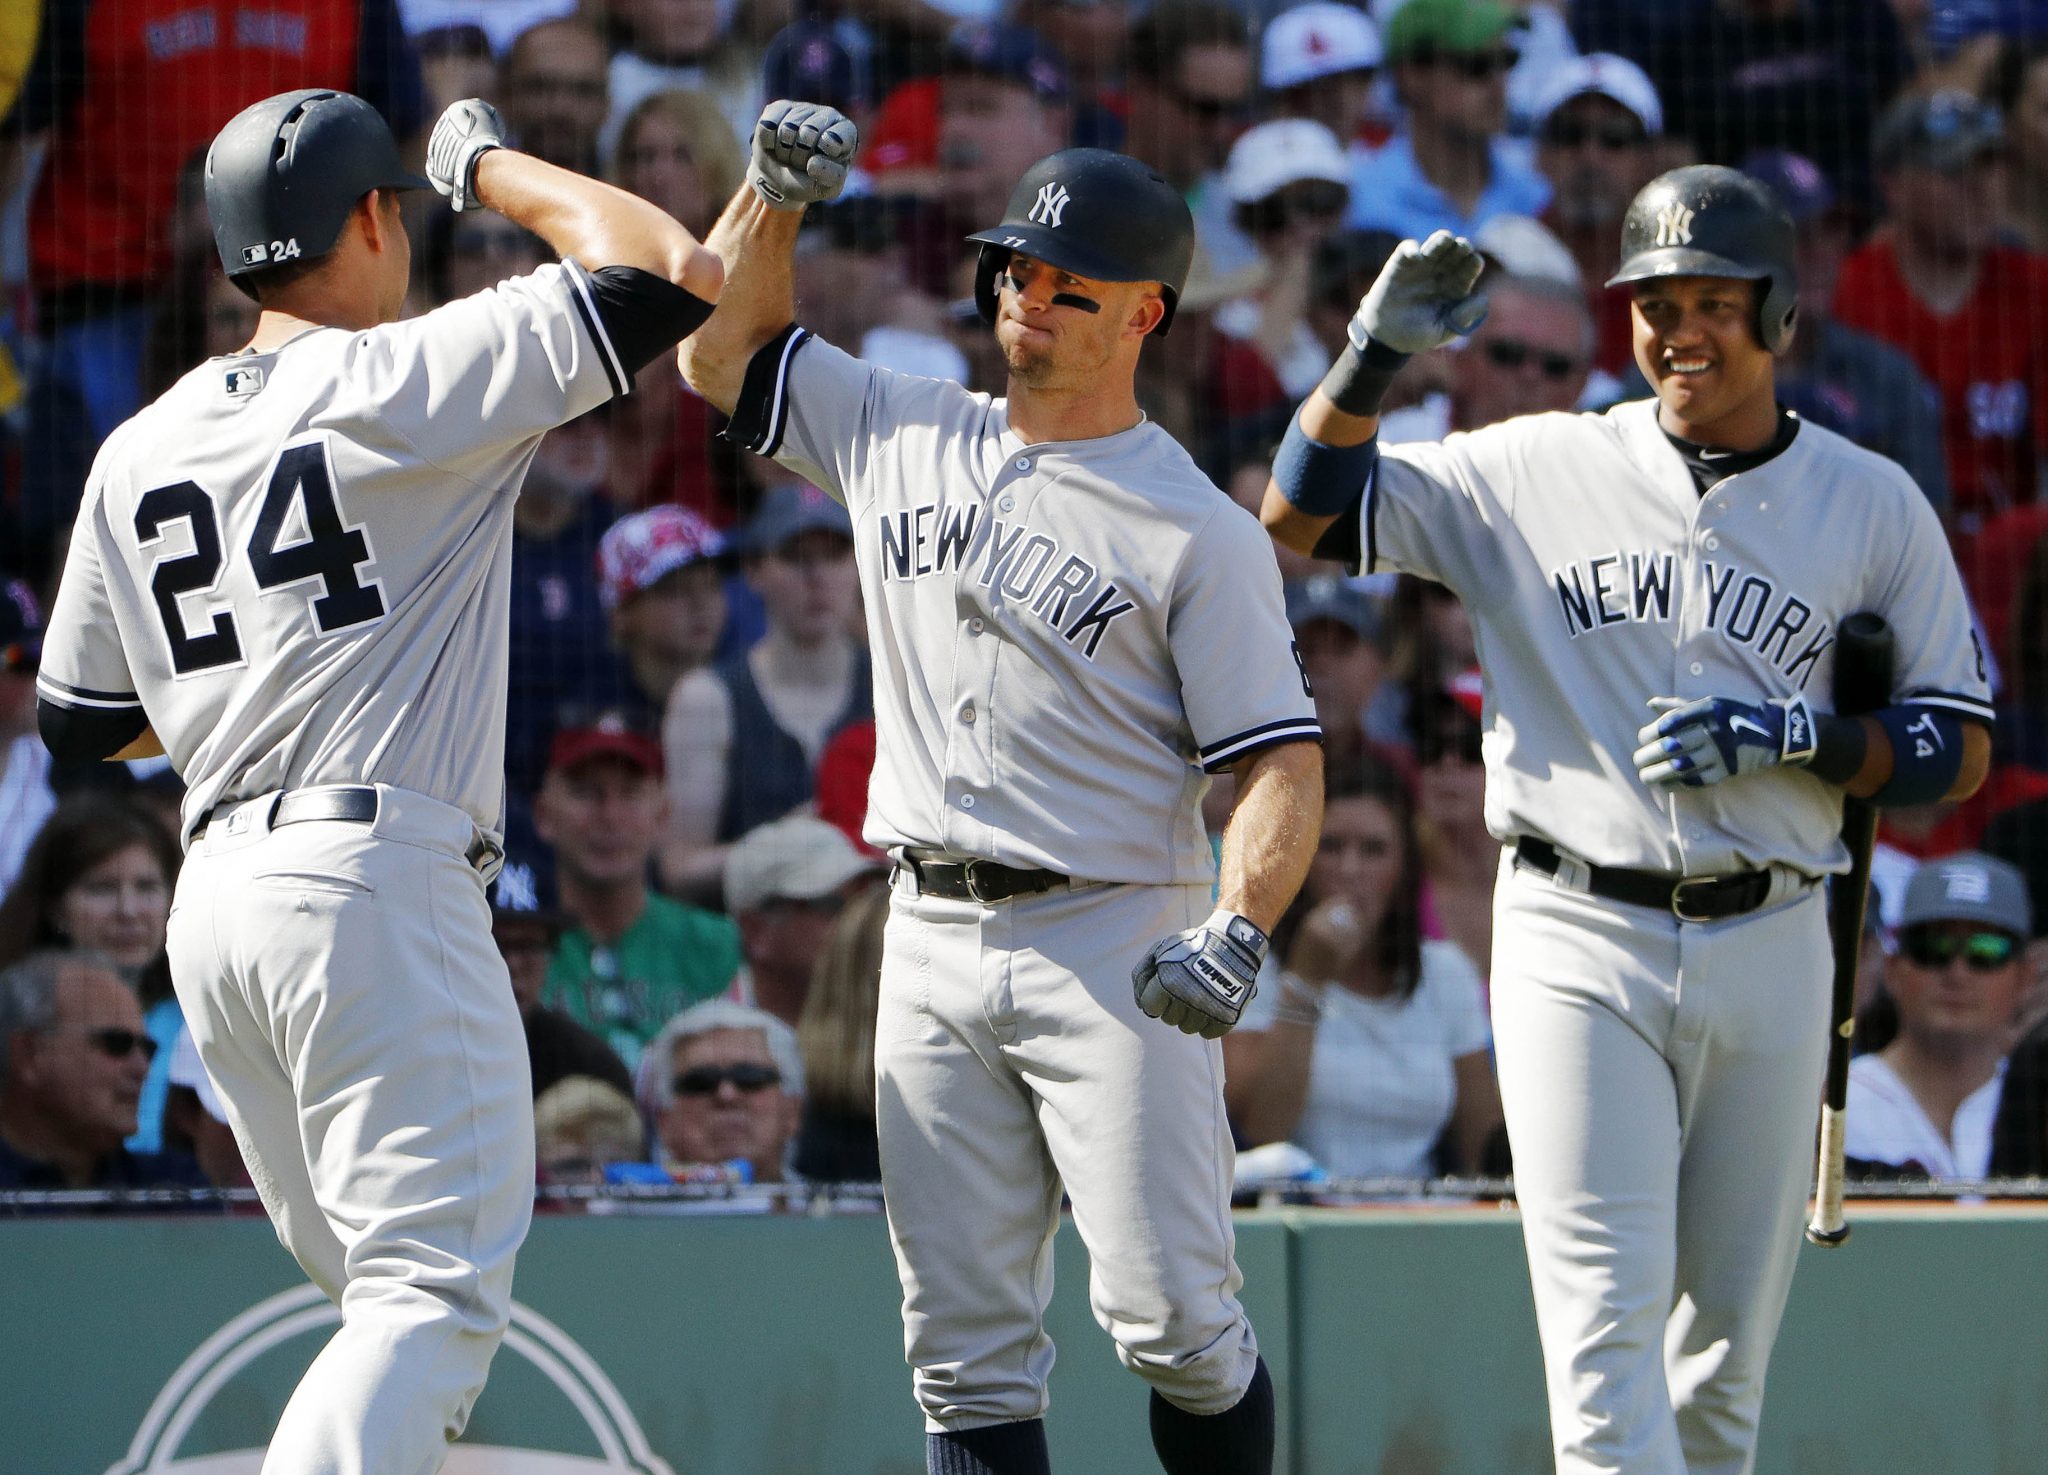 New York Yankees Wallpaper Image Photos Pictures Background